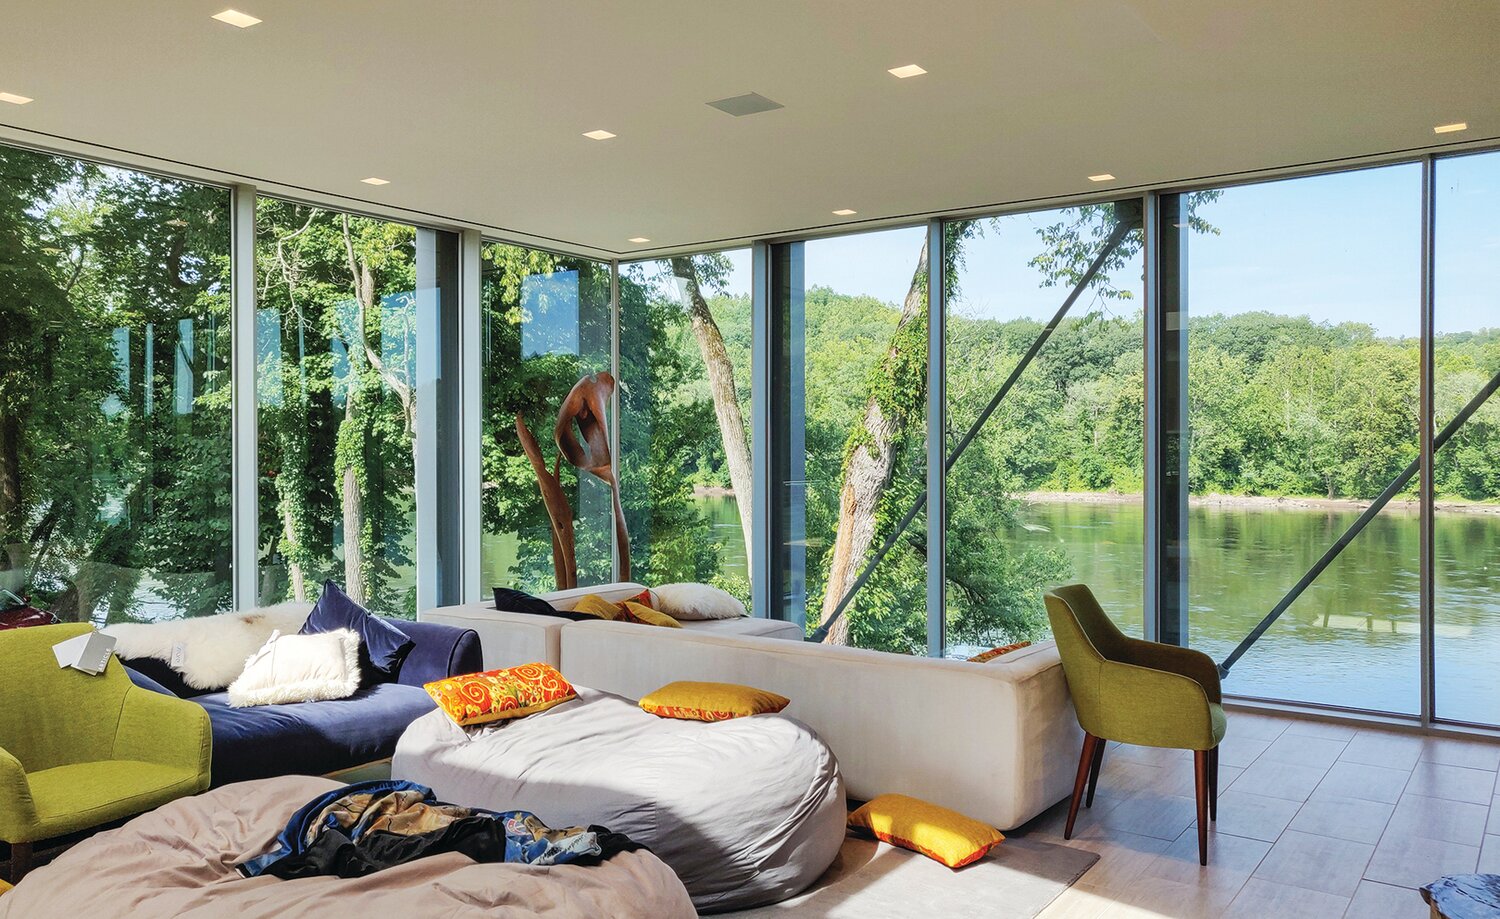 There’s no shortage of natural light at the award-winning River Road Residence along the Delaware River.